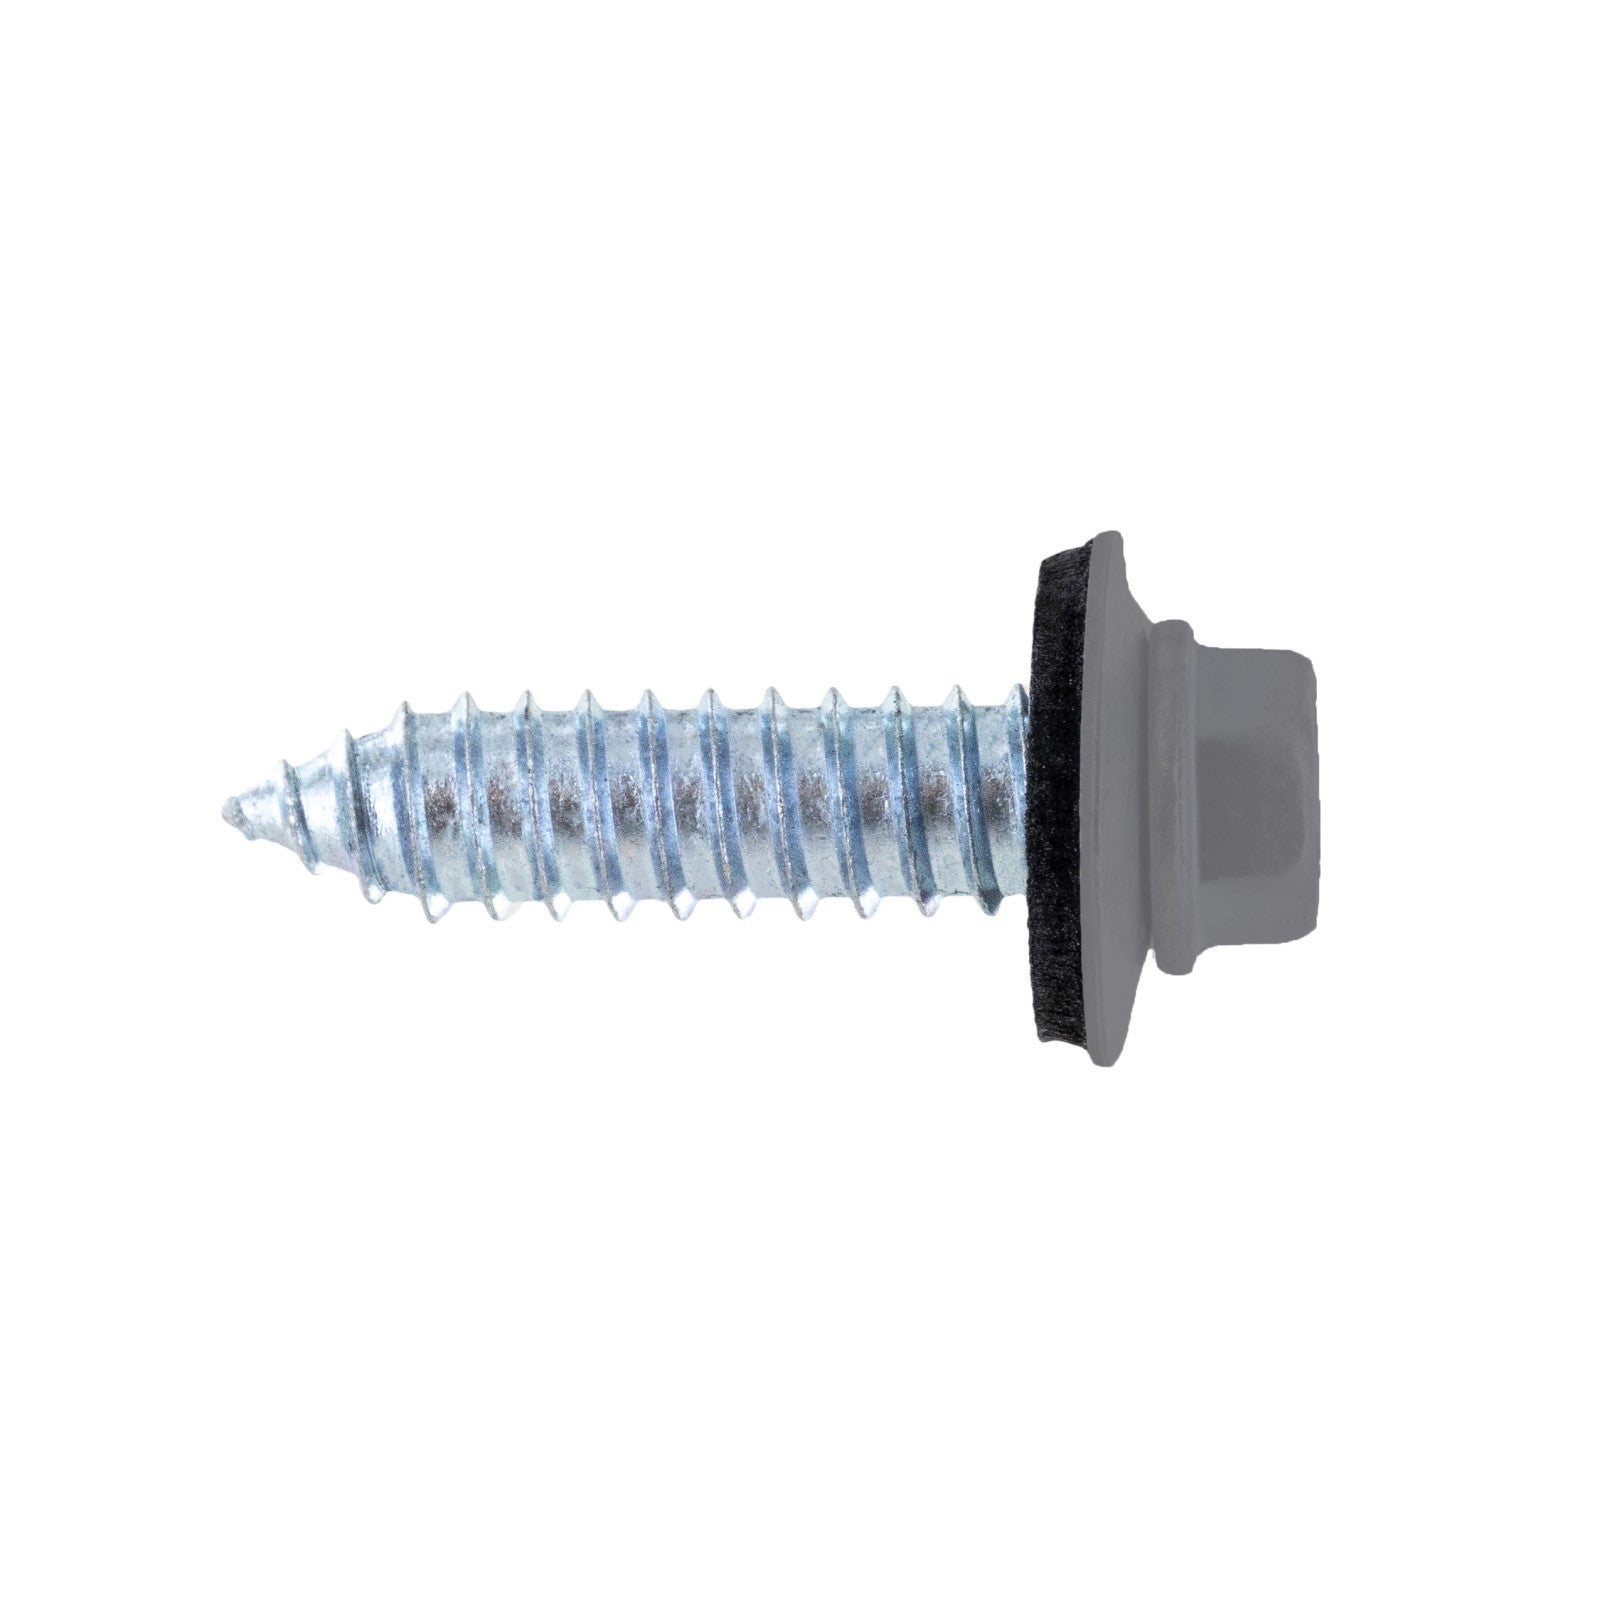 #17 x 1" Tapping Steelbinder Metal Roofing Screw - Charcoal Gray - Pkg 250